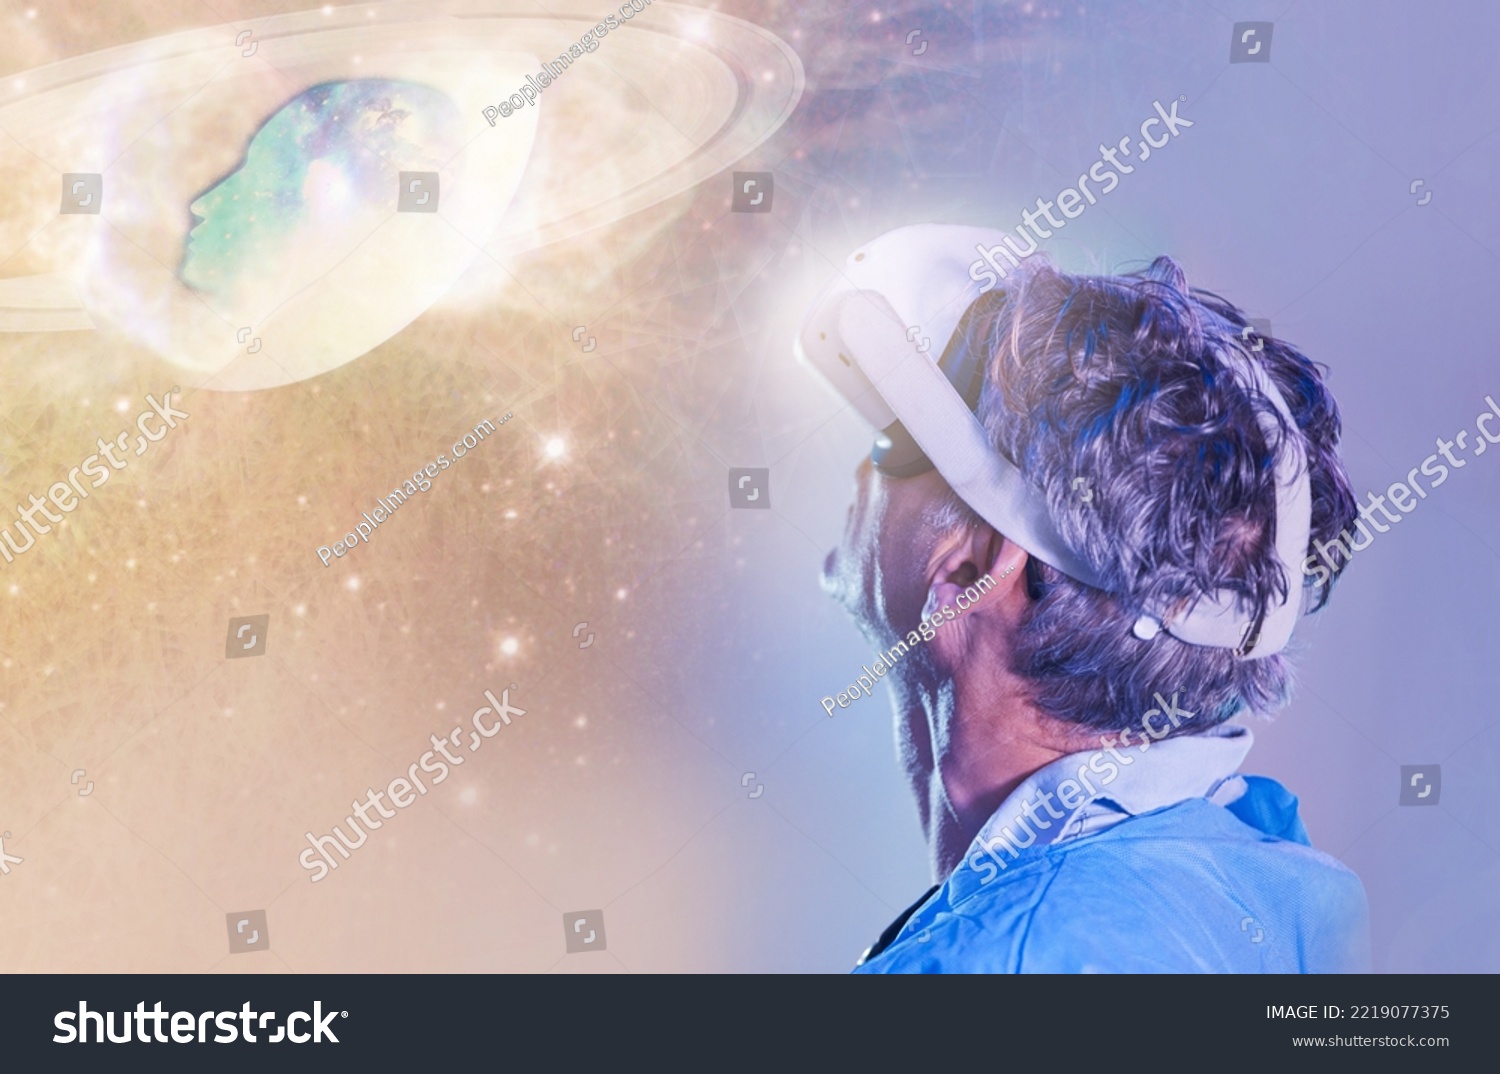 Man, metaverse or virtual reality for planet hologram, solar system or universe galaxy and manifestation or subconscious 3d. Vr headset, futuristic or solar system stars abstract in ai fantasy vision #2219077375